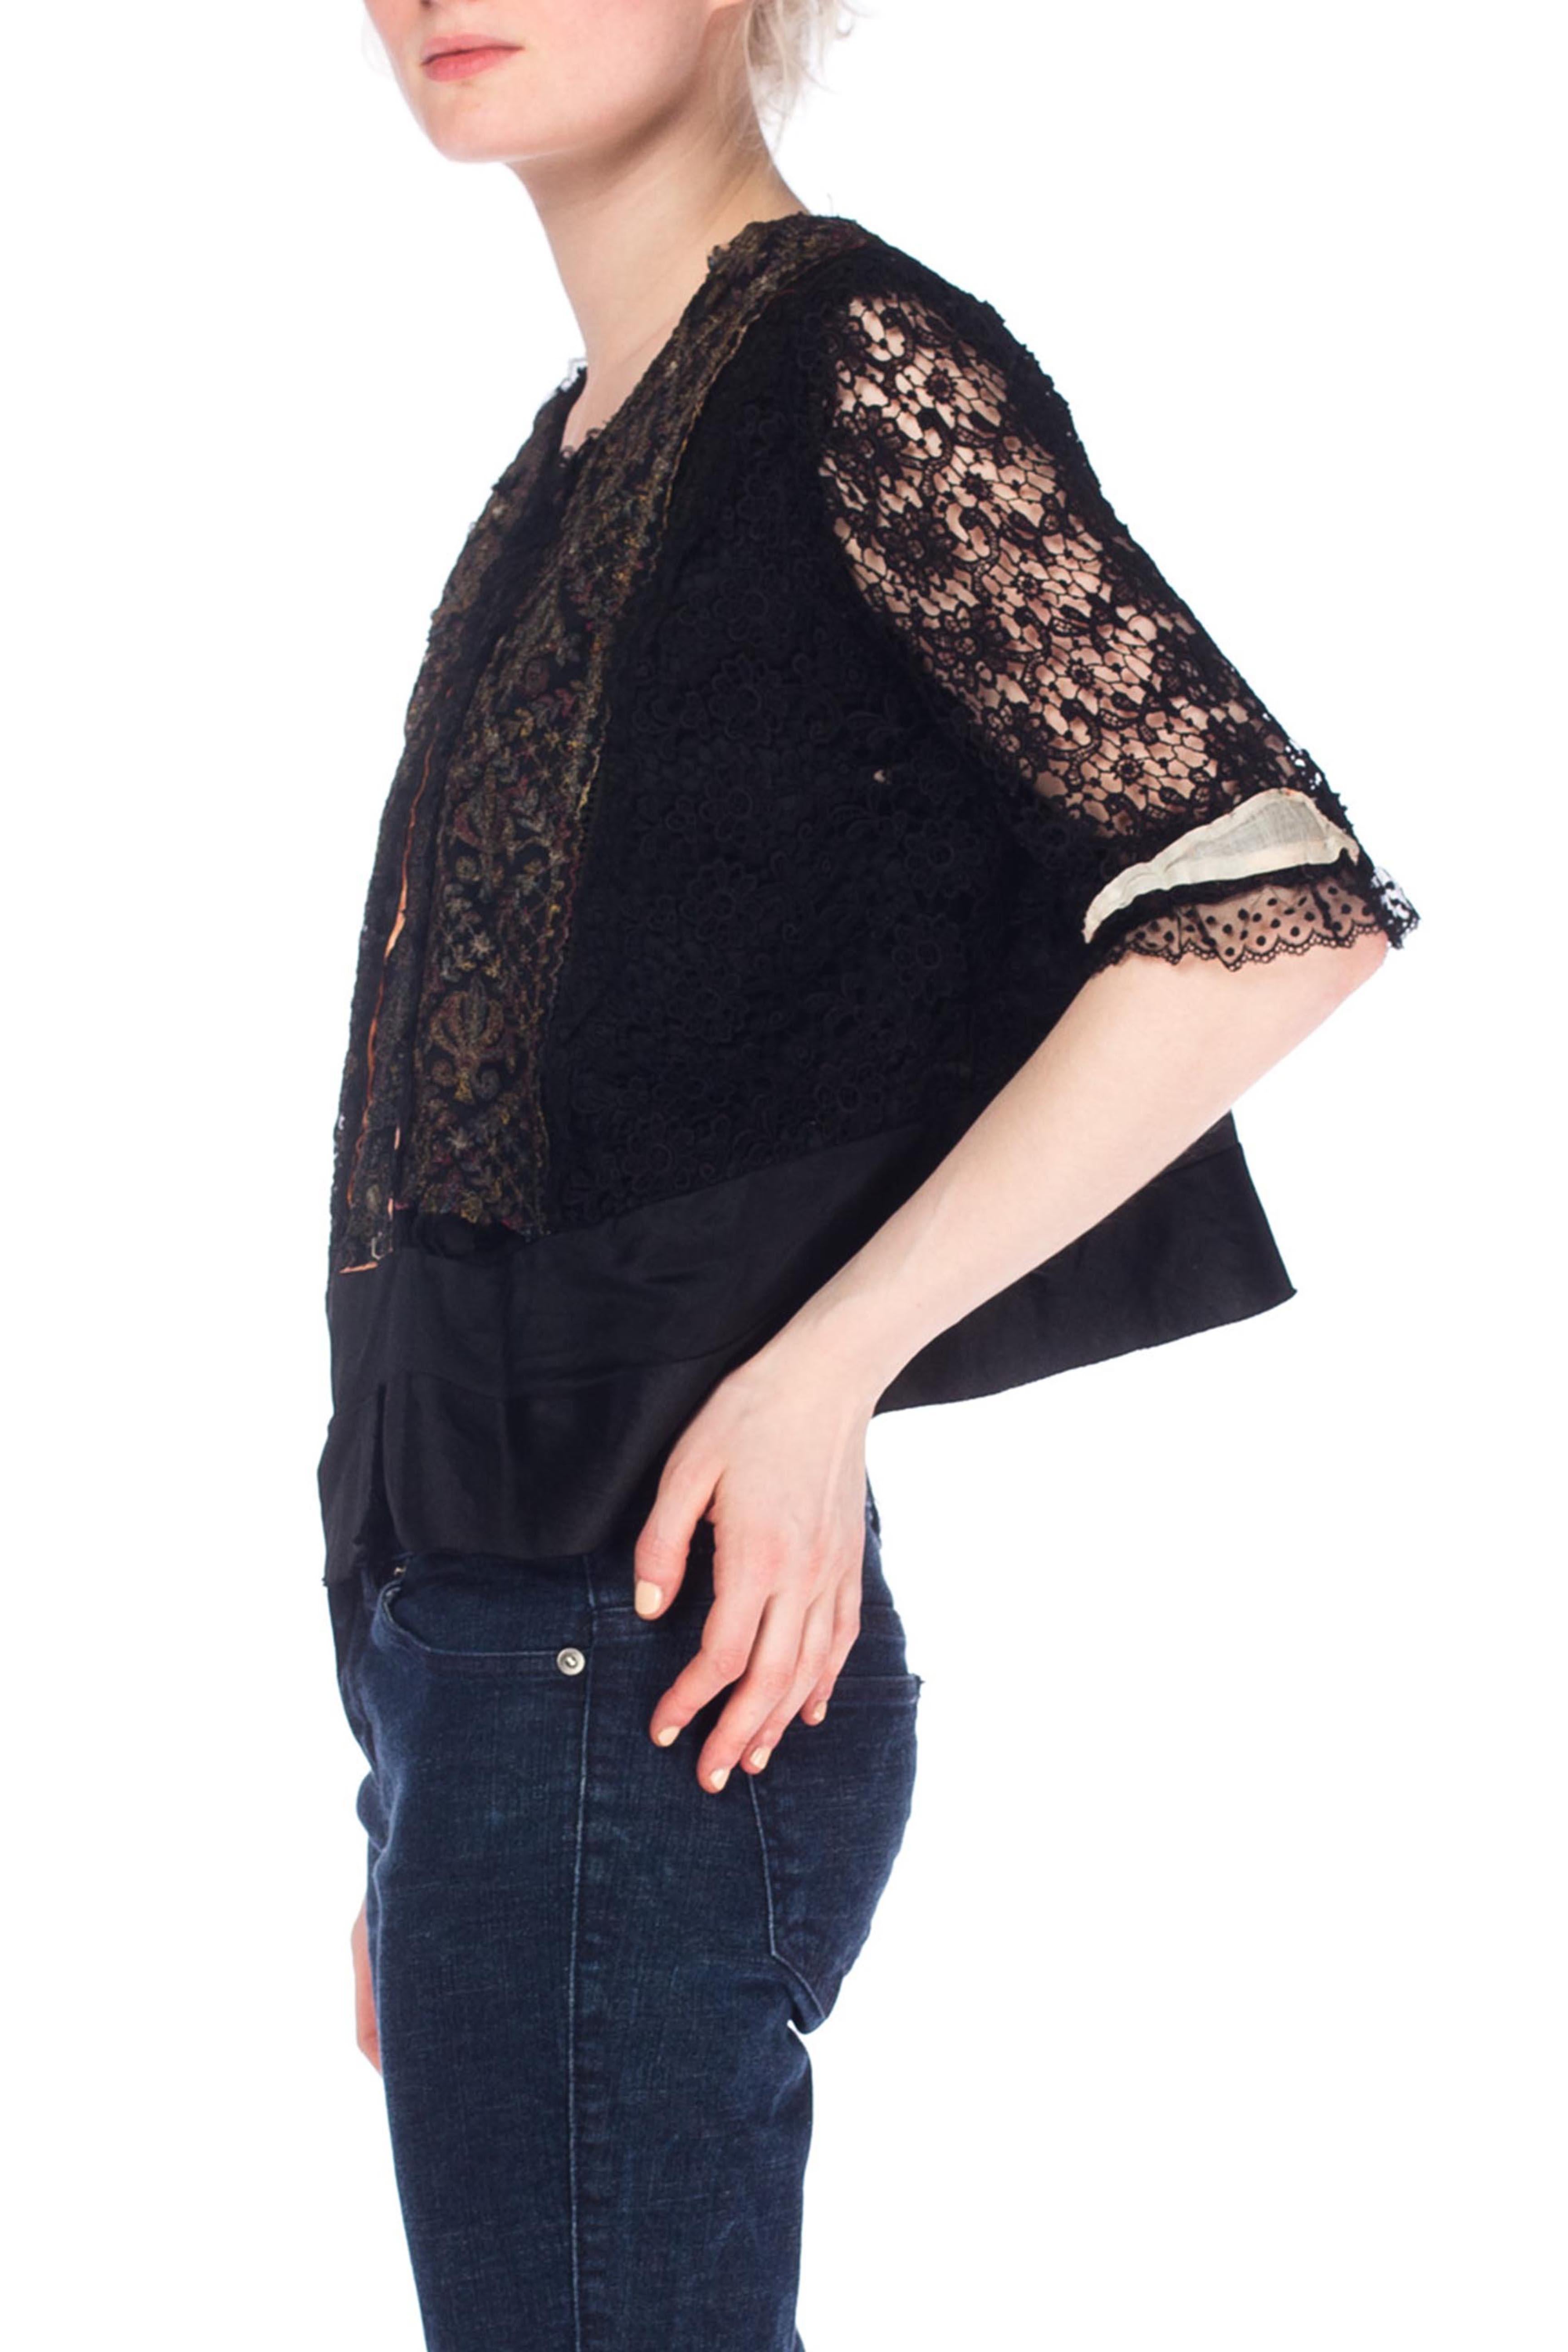 Women's Edwardian Black Silk & Lace Top With Metallic Embroidery, As-Is For Sale